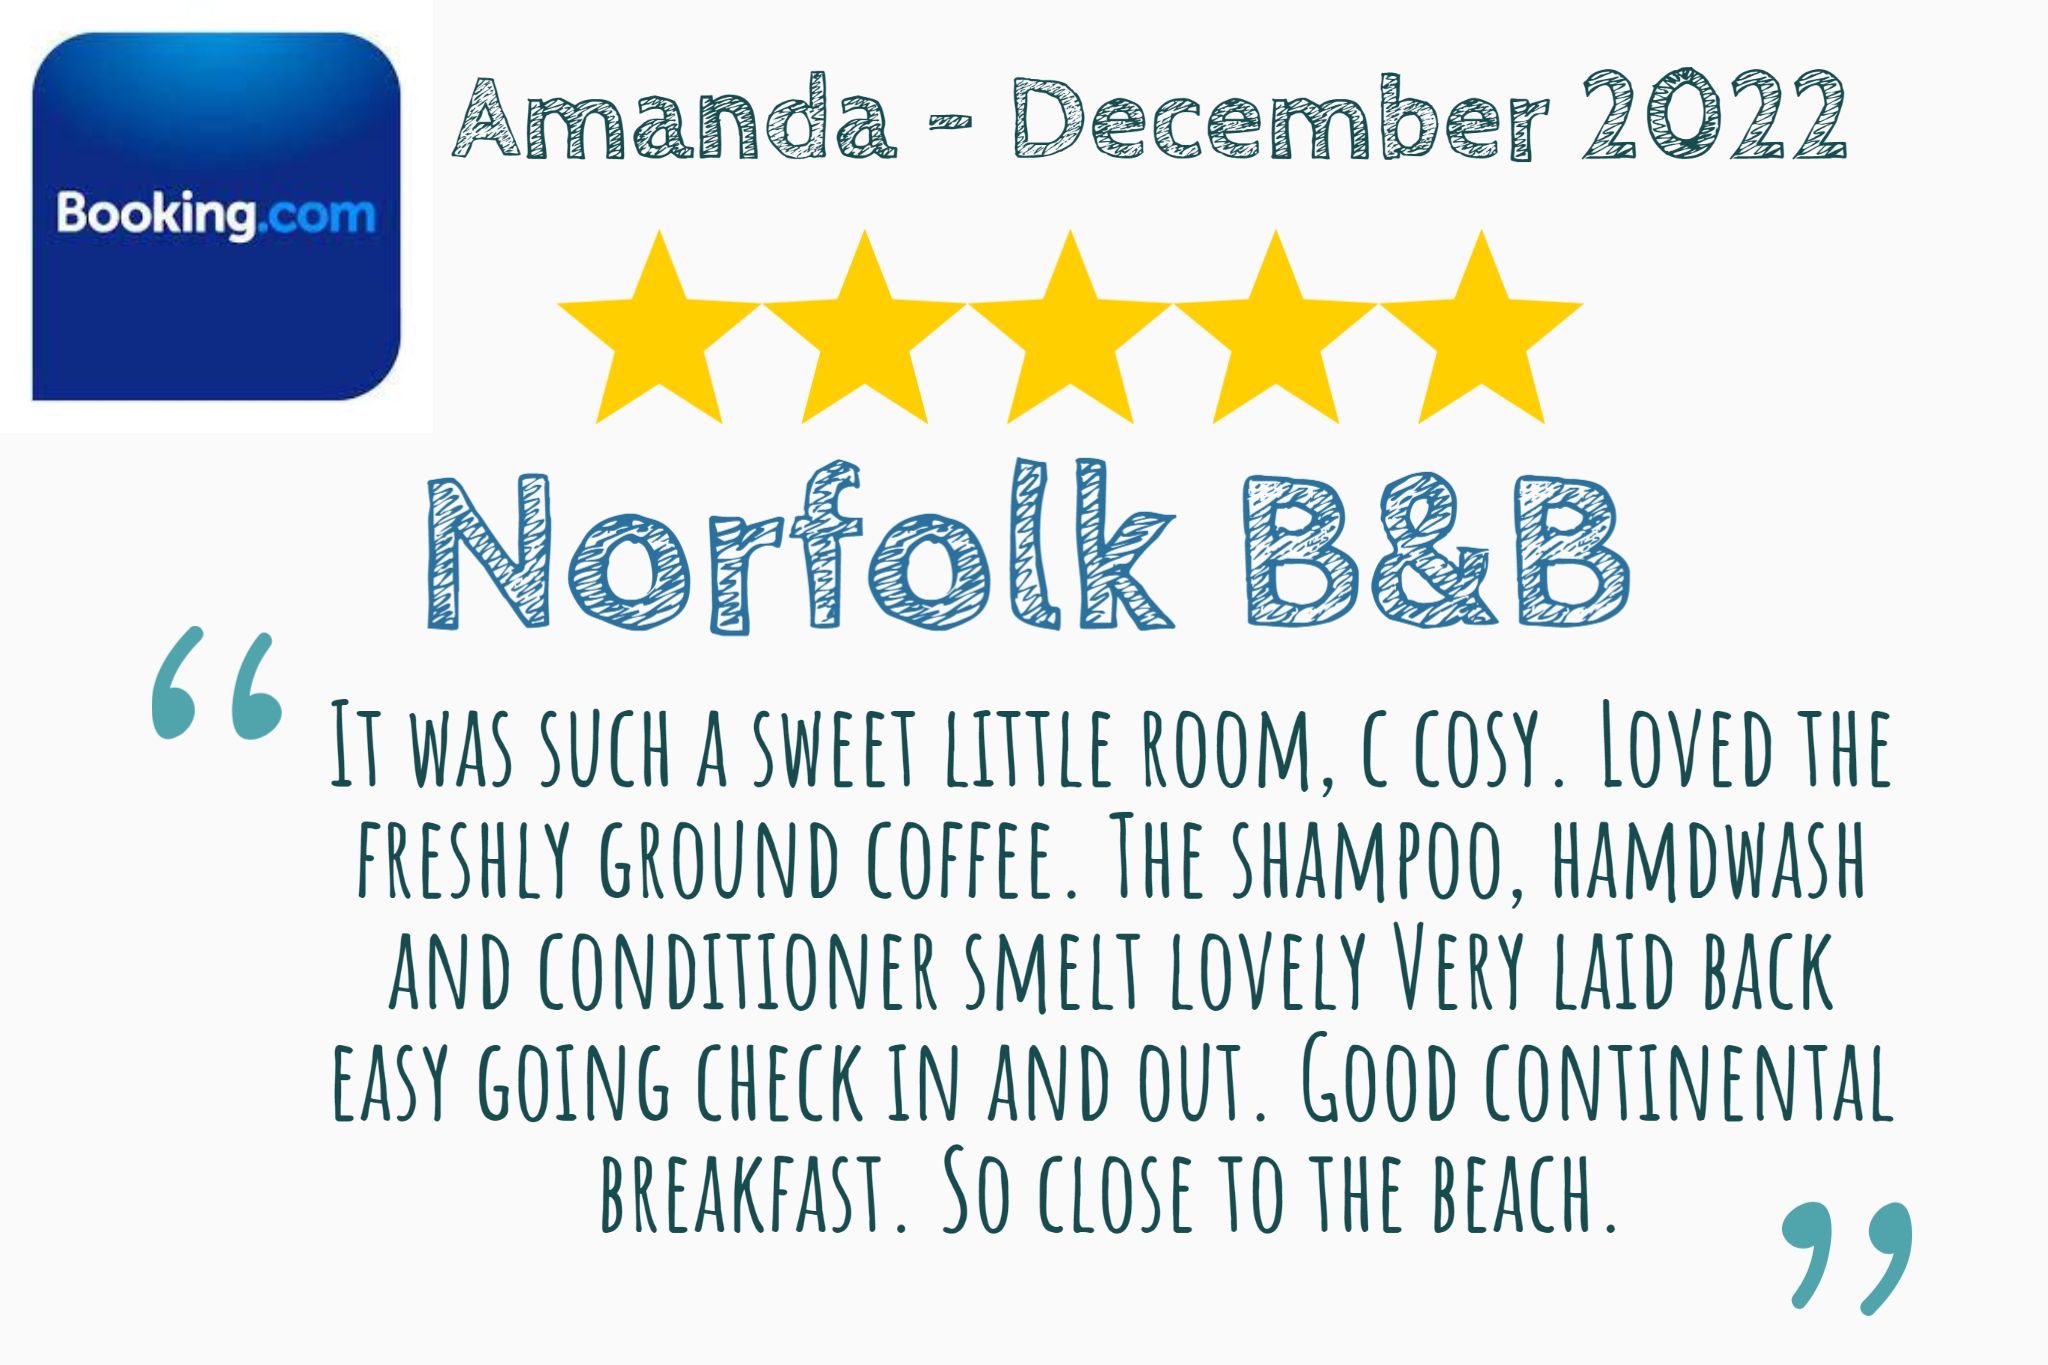 Amanda's Booking.com review of the sweet, cosy, and lovely B&B rooms